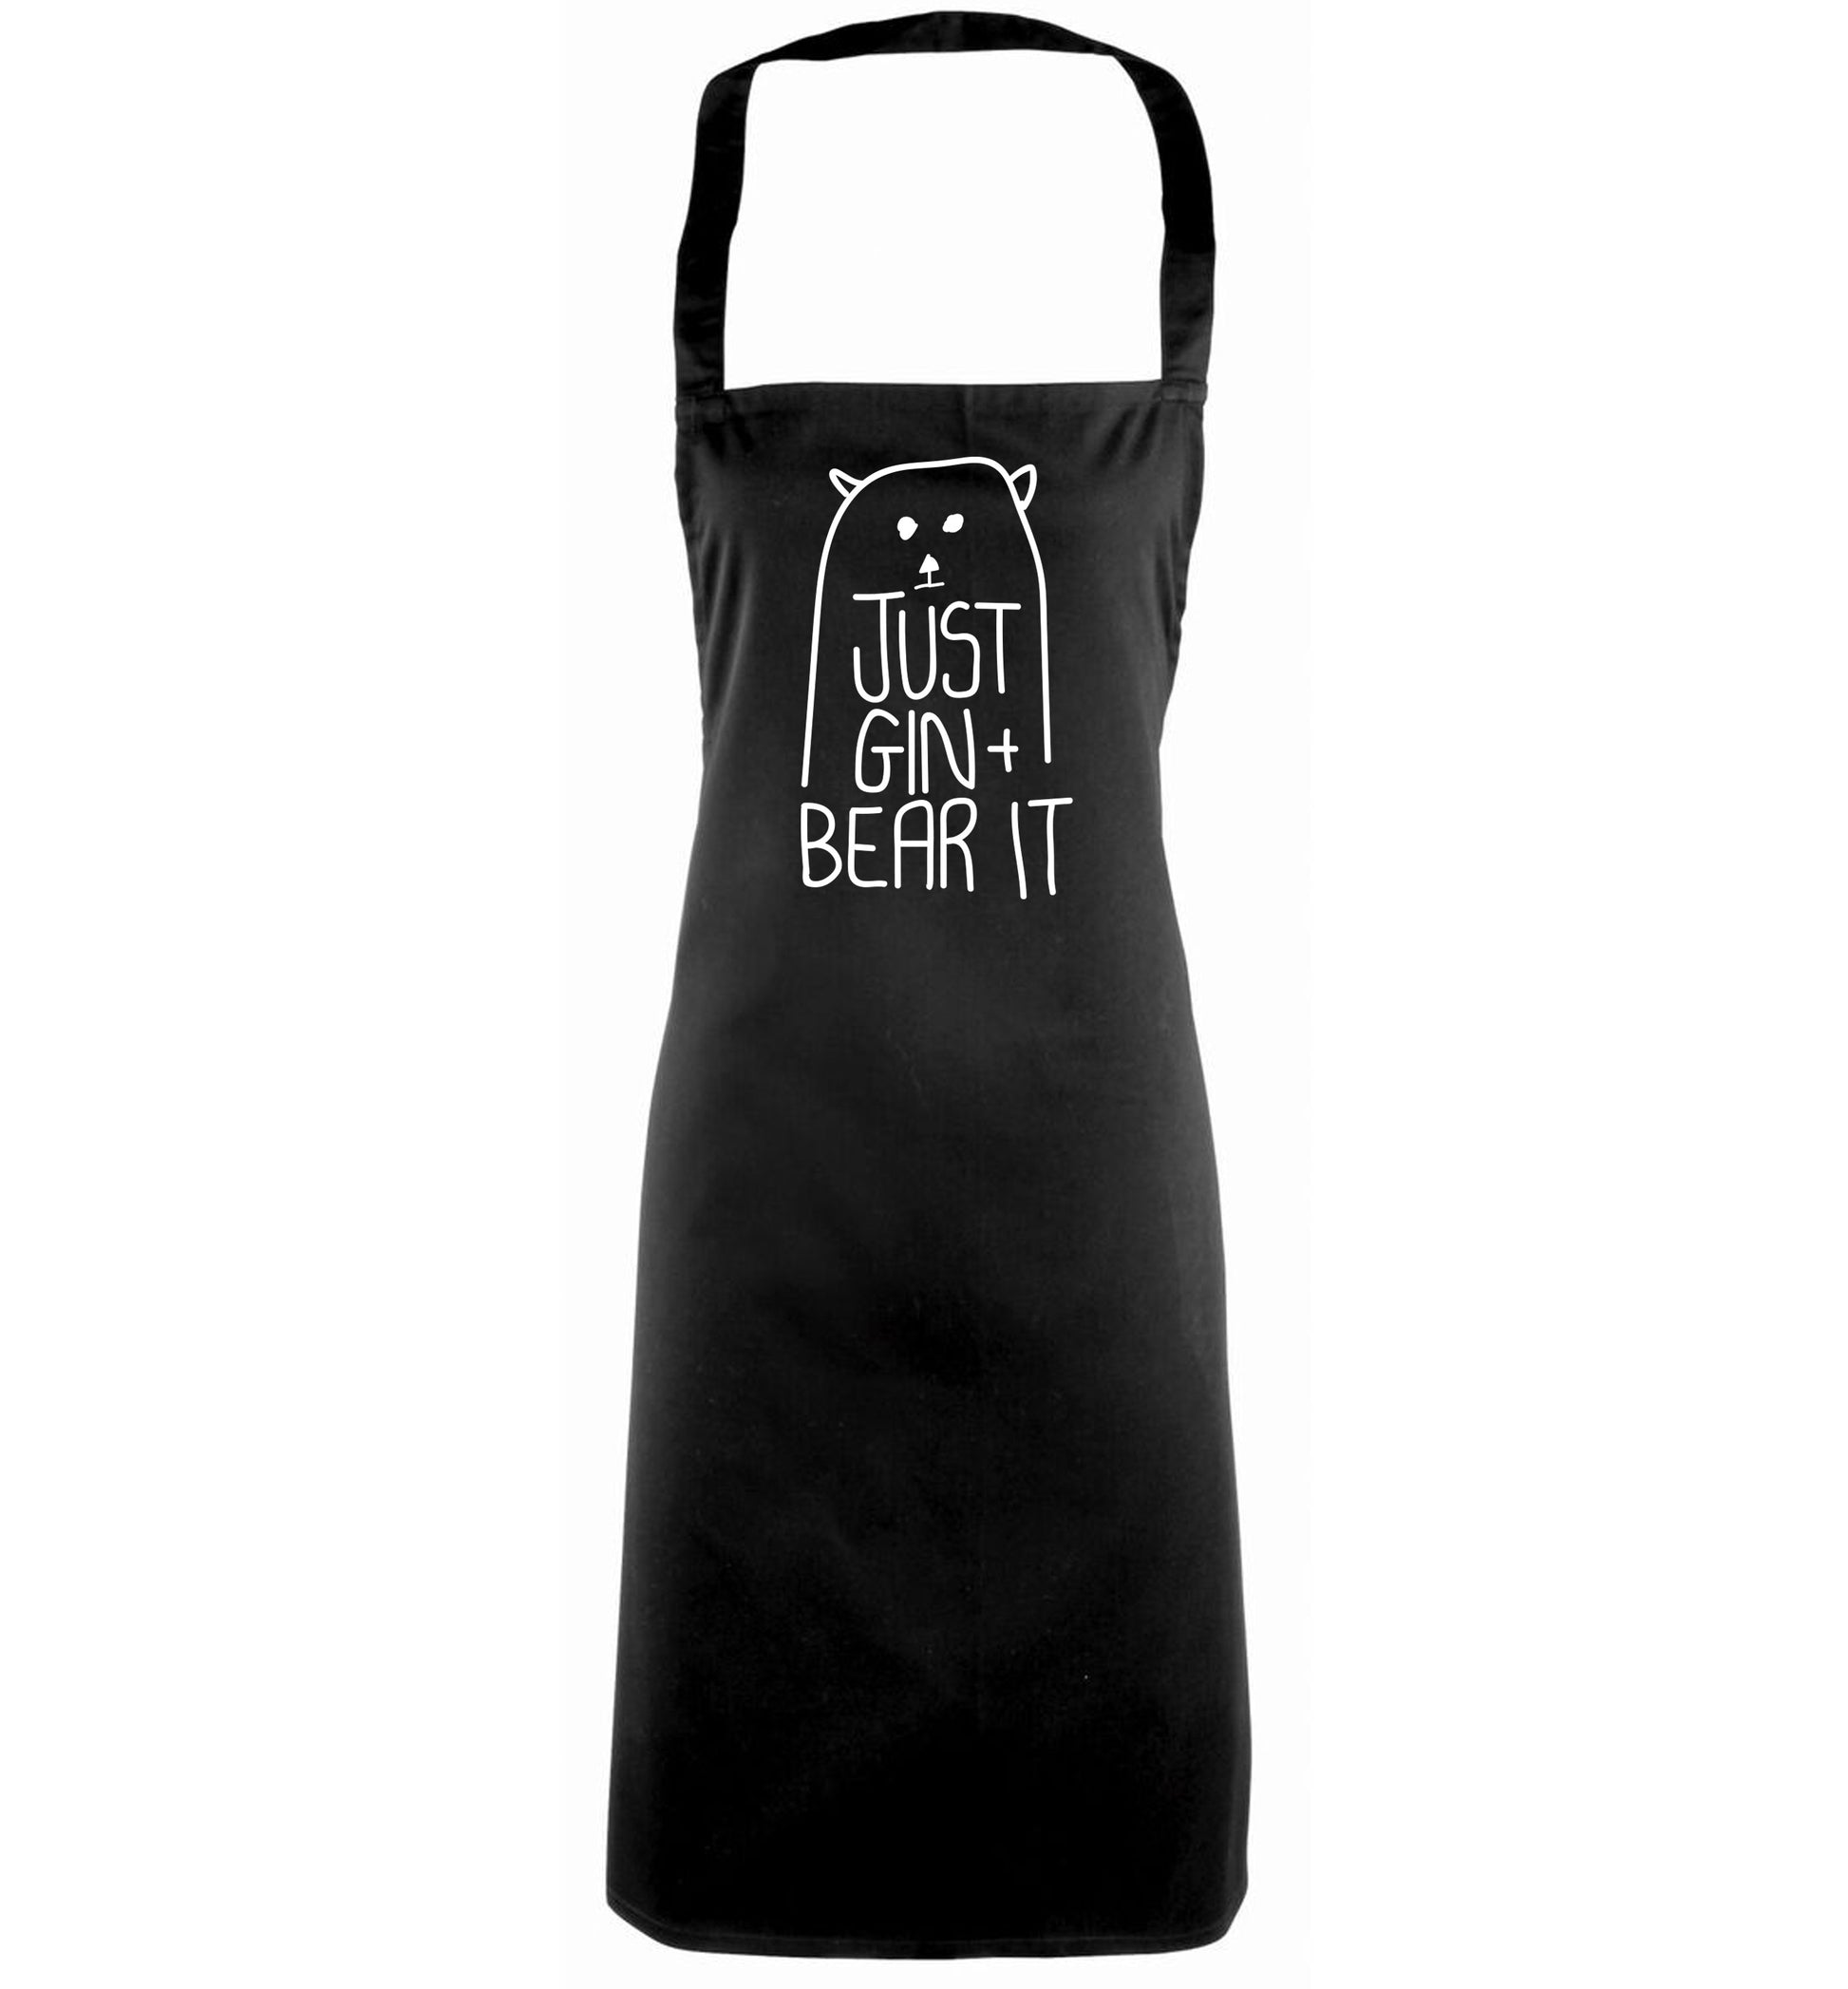 Just gin and bear it black apron